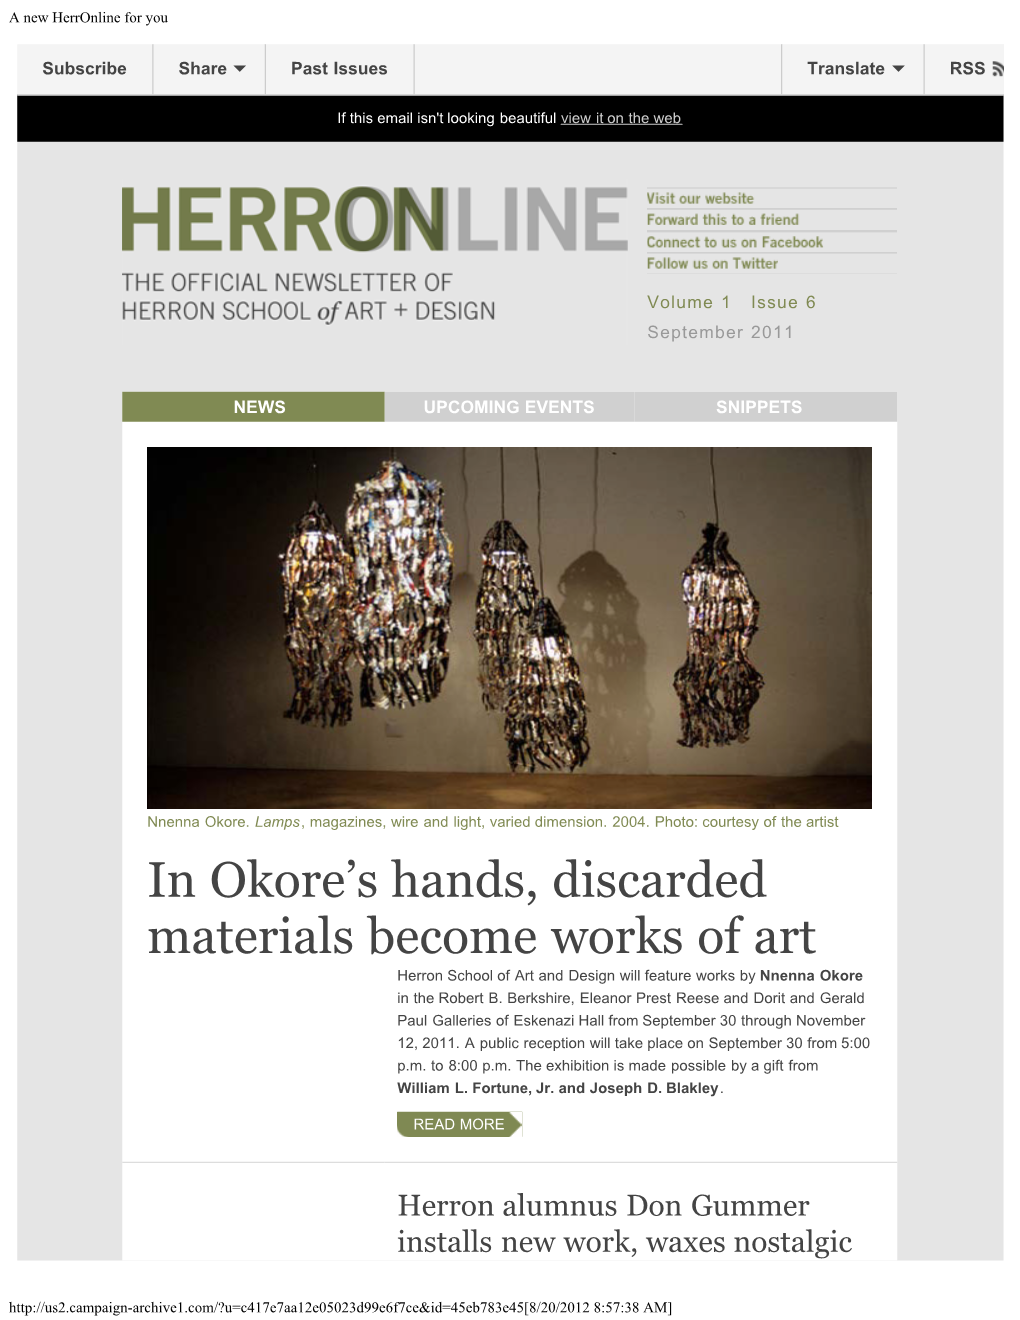 A New Herronline for You